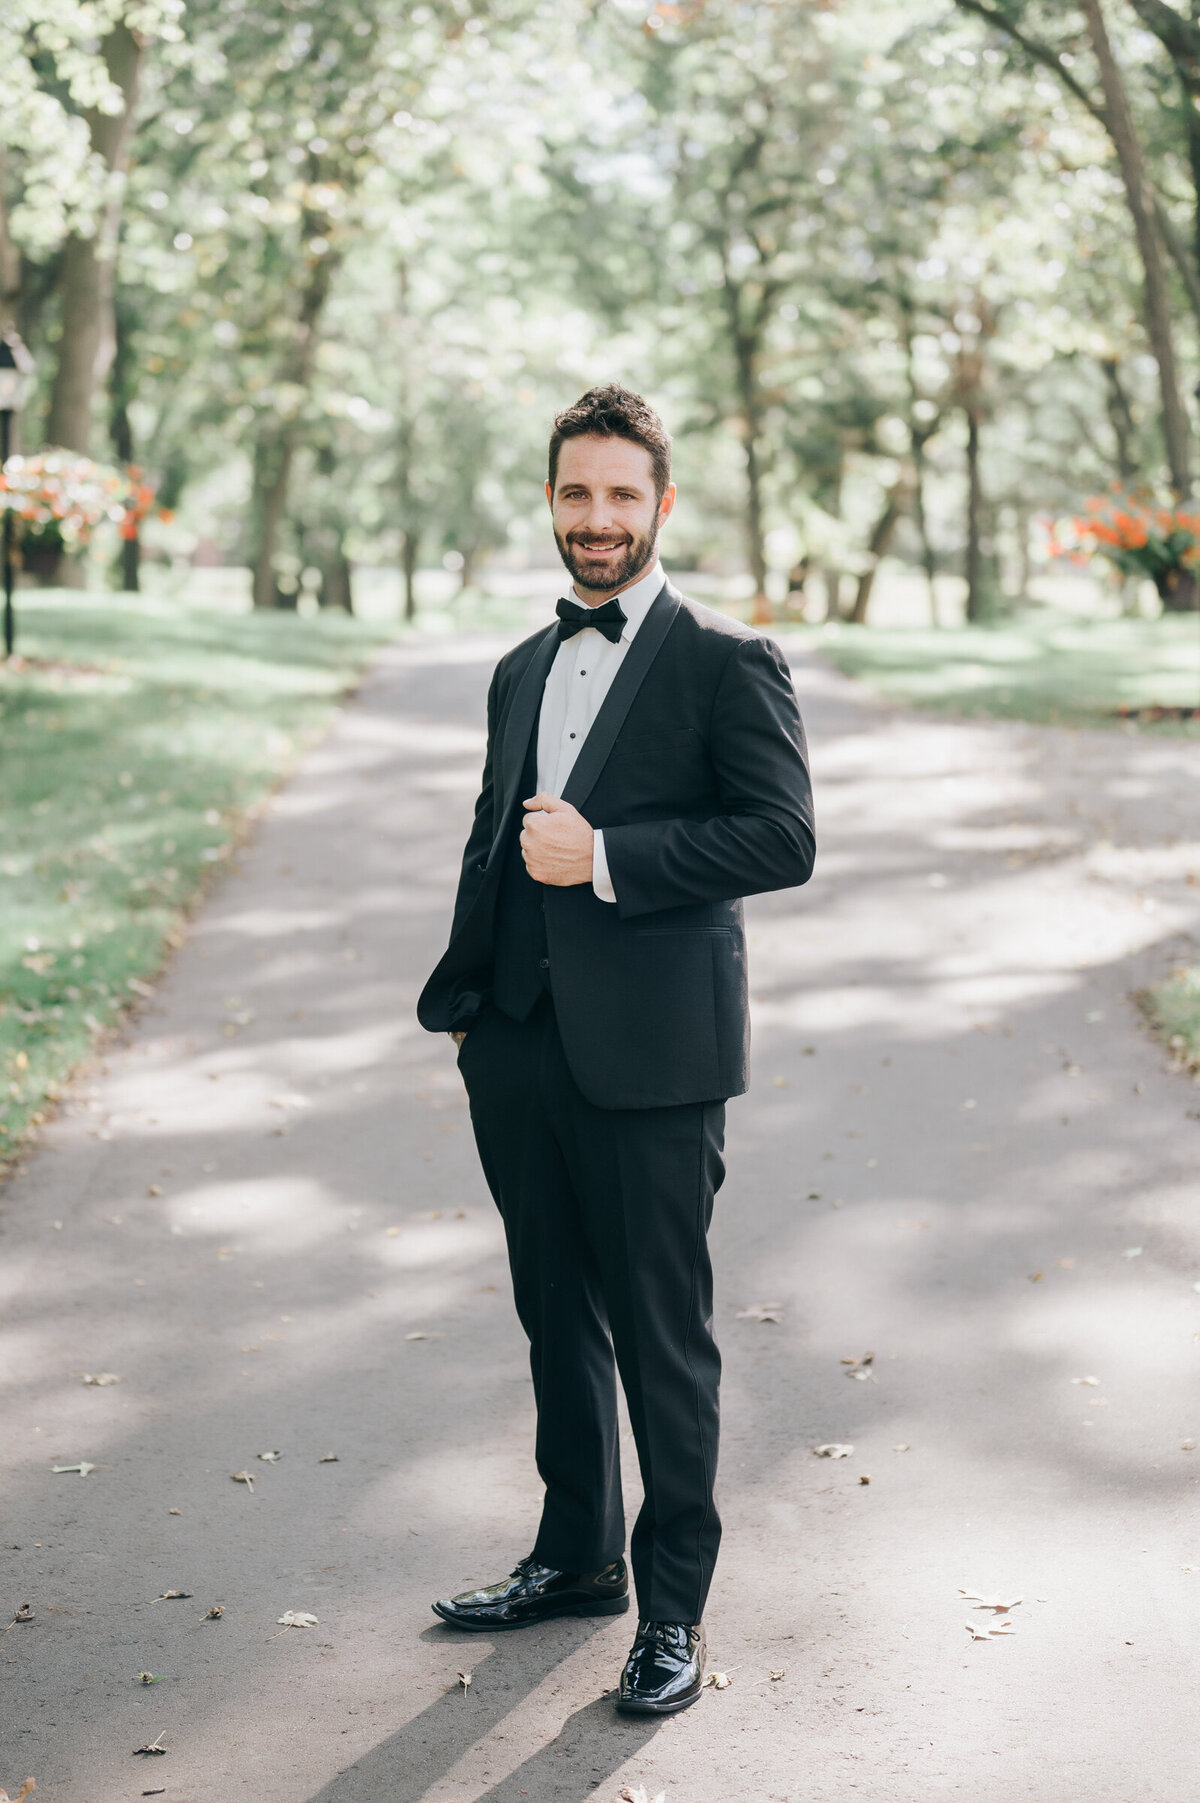 Groom looking chic in charcoal suit